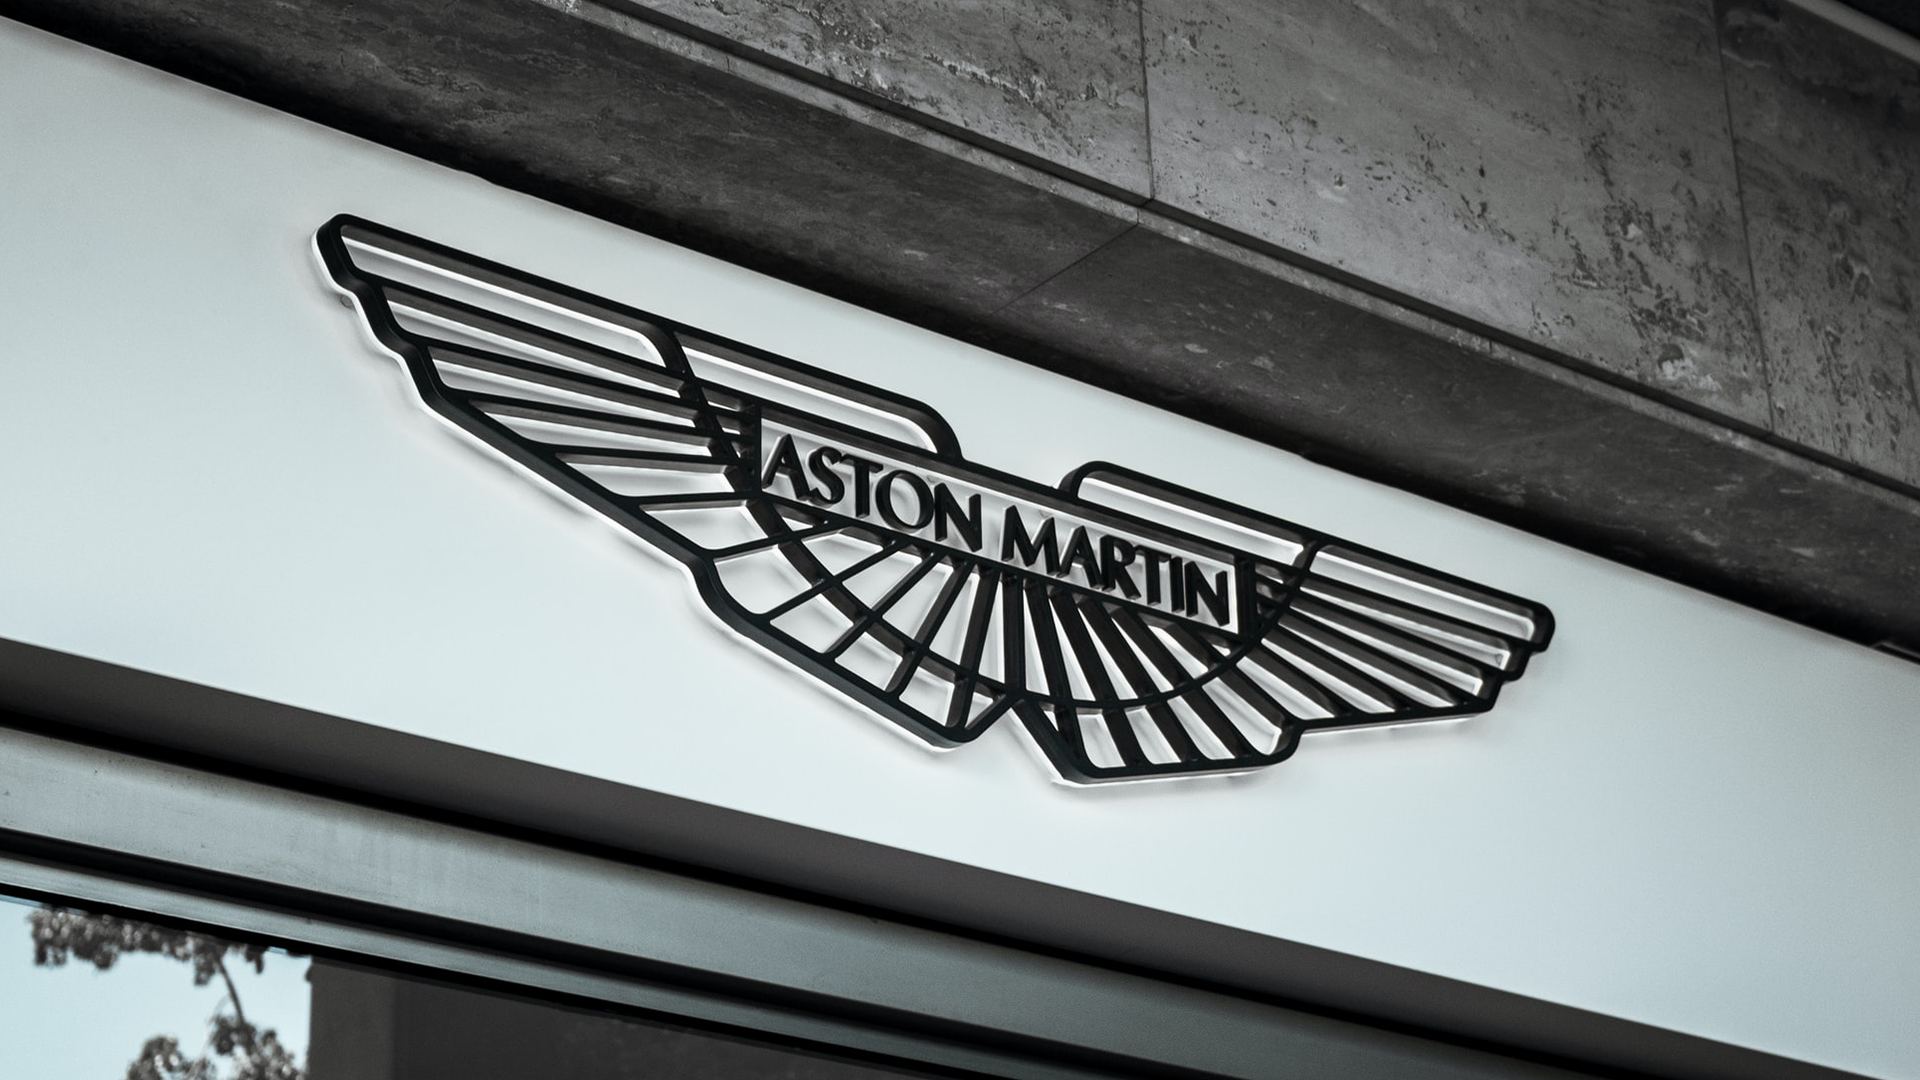 unsplash-logoJannis Lucas The Racing Point F1 Team will be rebranded to an Aston Martin works team from the 2021 season. Lawrence Stroll, part-owner of both entities, completed the deal in January 2020. Alongside this, Red Bull announced that their title sponsorship deal with Aston Martin would conclude at the end of the 2020 season.